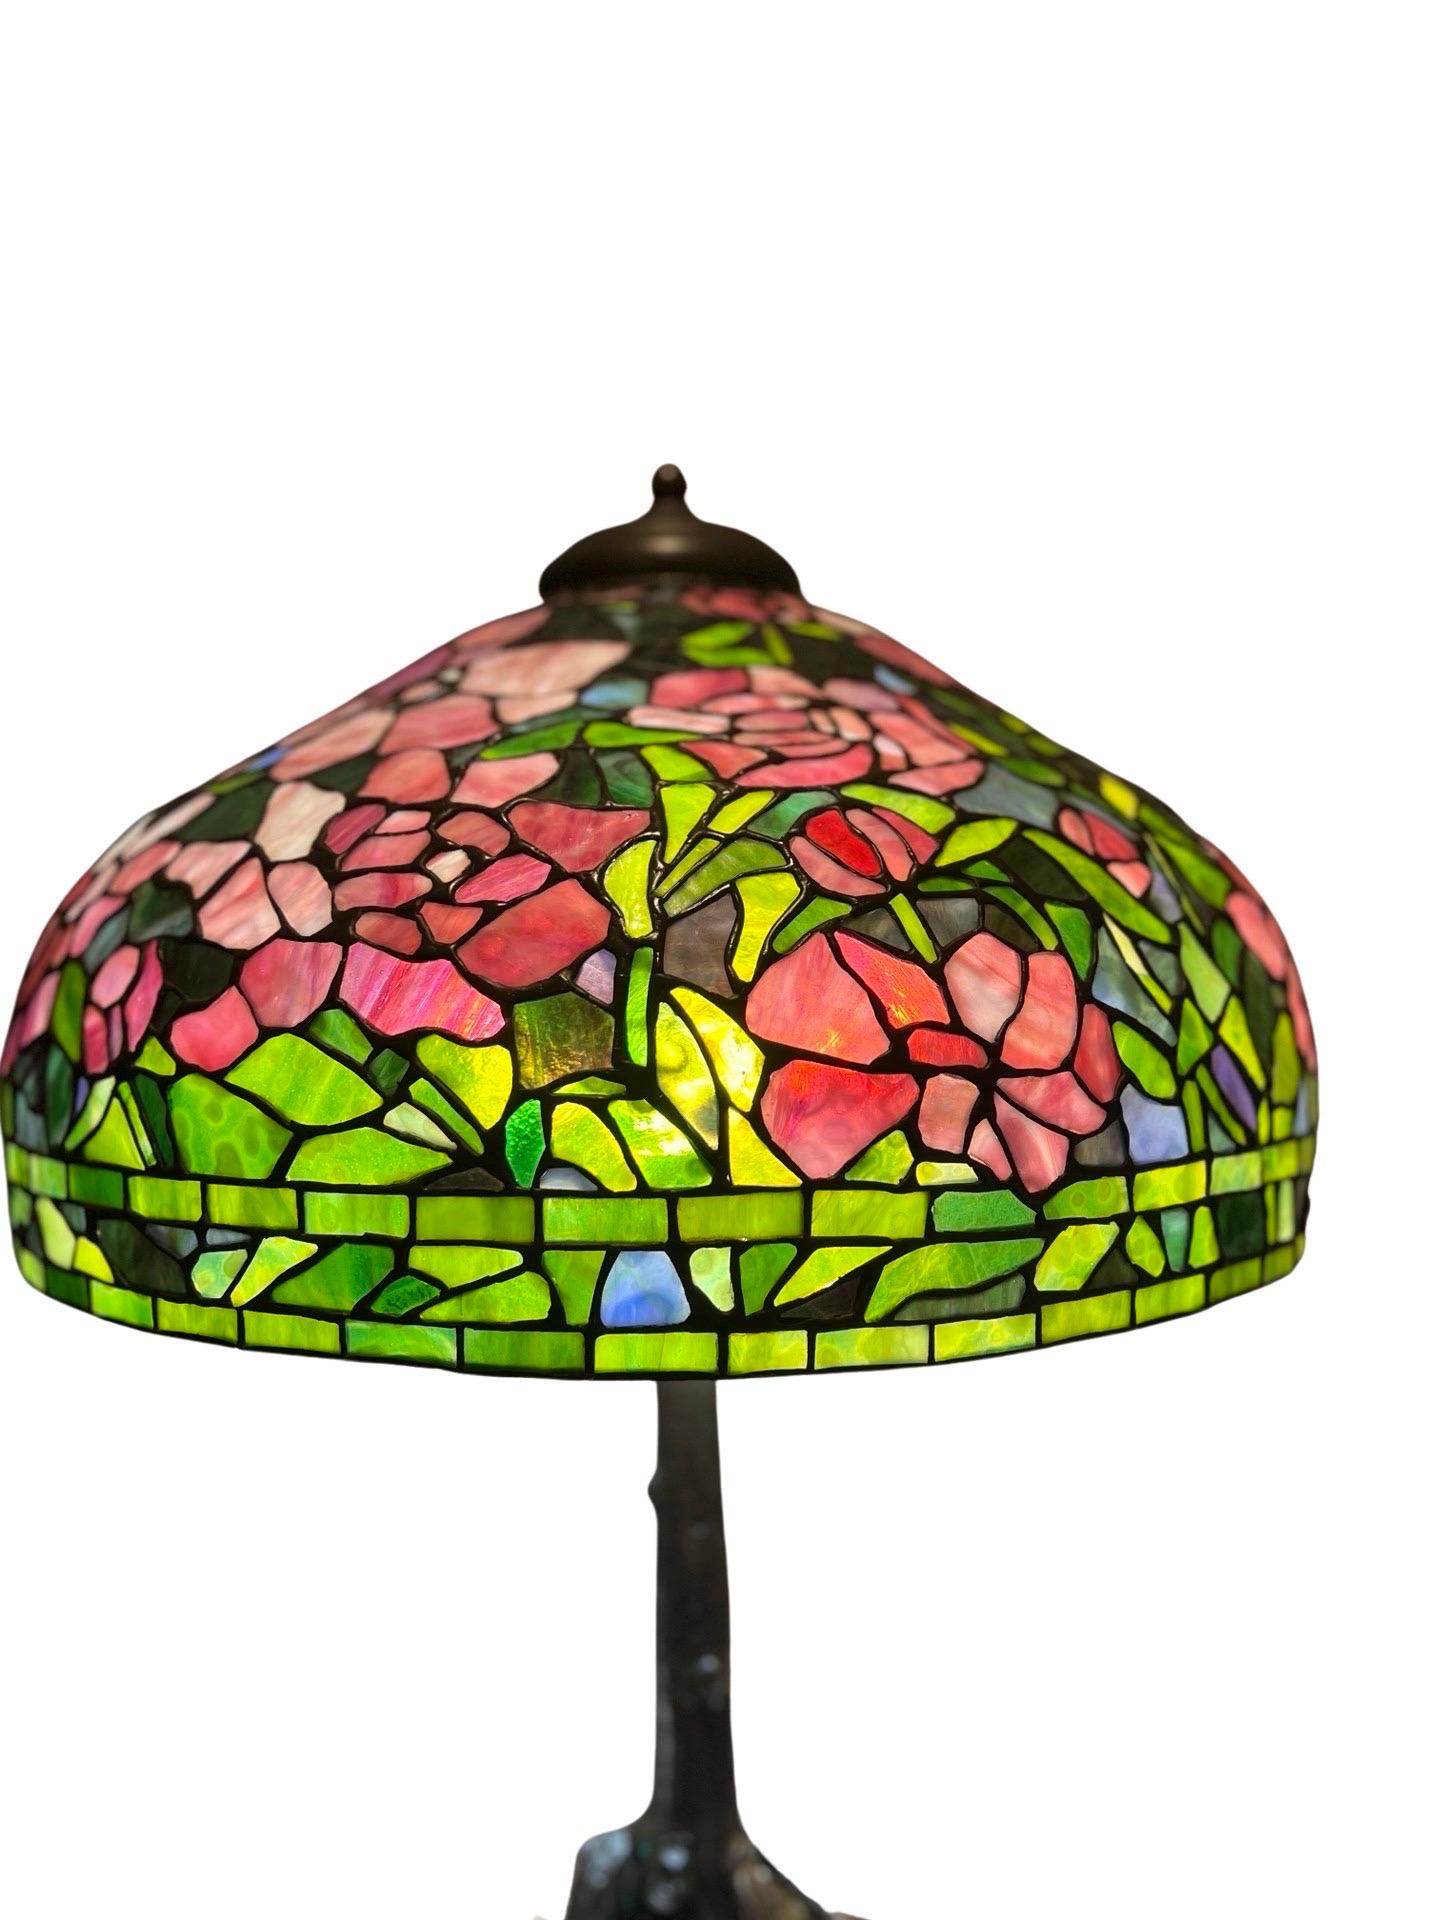 American Unique Art Glass & Metal Company Leaded Glass Peony Table Lamp C. 1915 For Sale